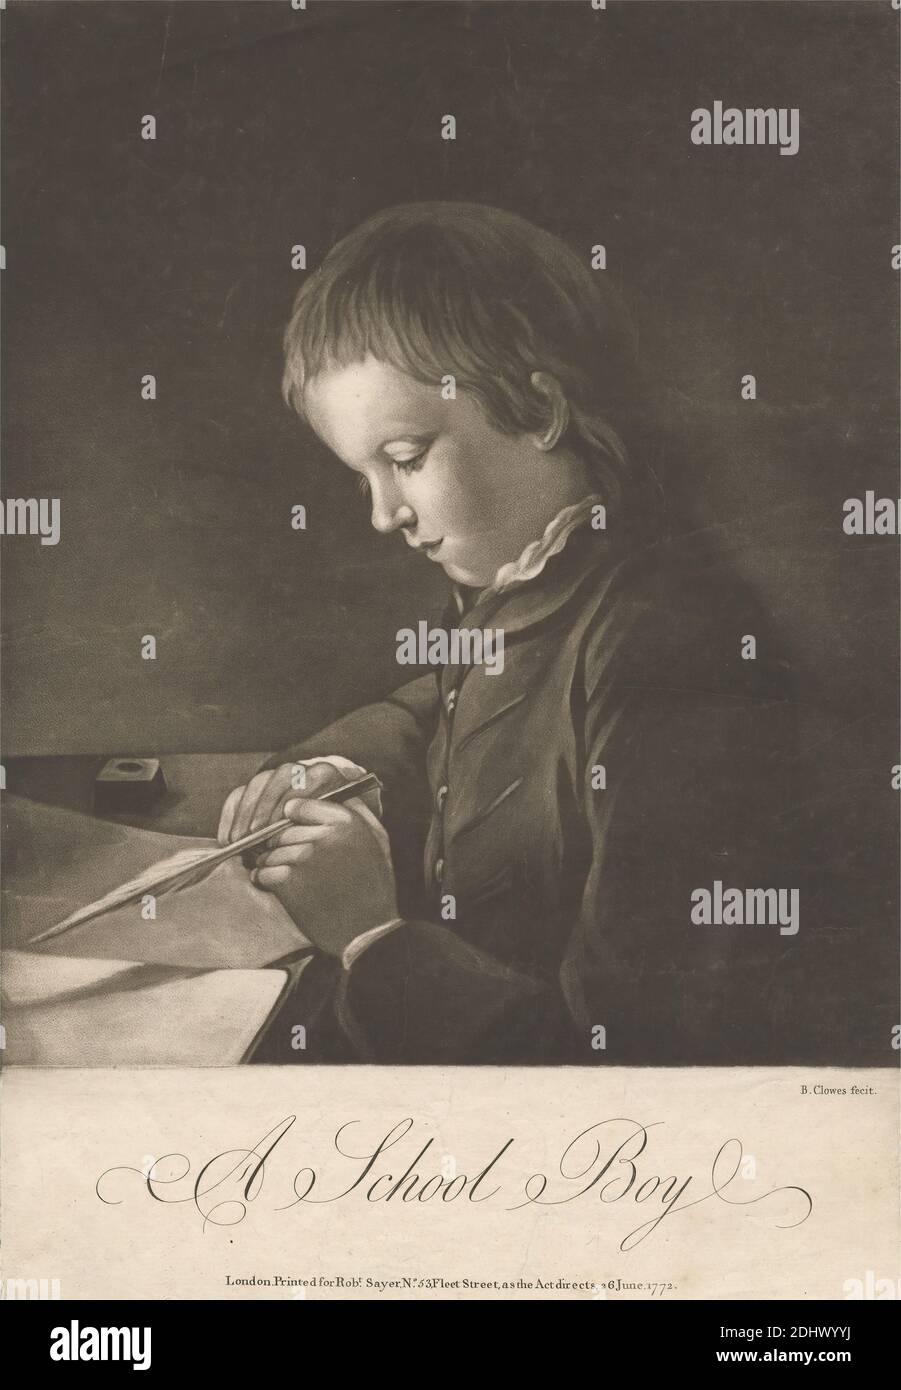 A School Boy (William Elmer), Print made by Butler Clowes, active 1768, died 1782, British, after Robert Sayer, 1725–1794, British, 1772, Mezzotint on moderately thick, slightly textured, beige laid paper, Sheet: 12 15/16 × 8 7/8 inches (32.9 × 22.5 cm) and Image: 10 1/2 x 8 7/8 inches (26.6 x 22.6 cm), boy, child, coat, genre subject, ink, paper, portrait, profile, quill, school, student, studying, thoughtful, writing (processes), writing (processes Stock Photo